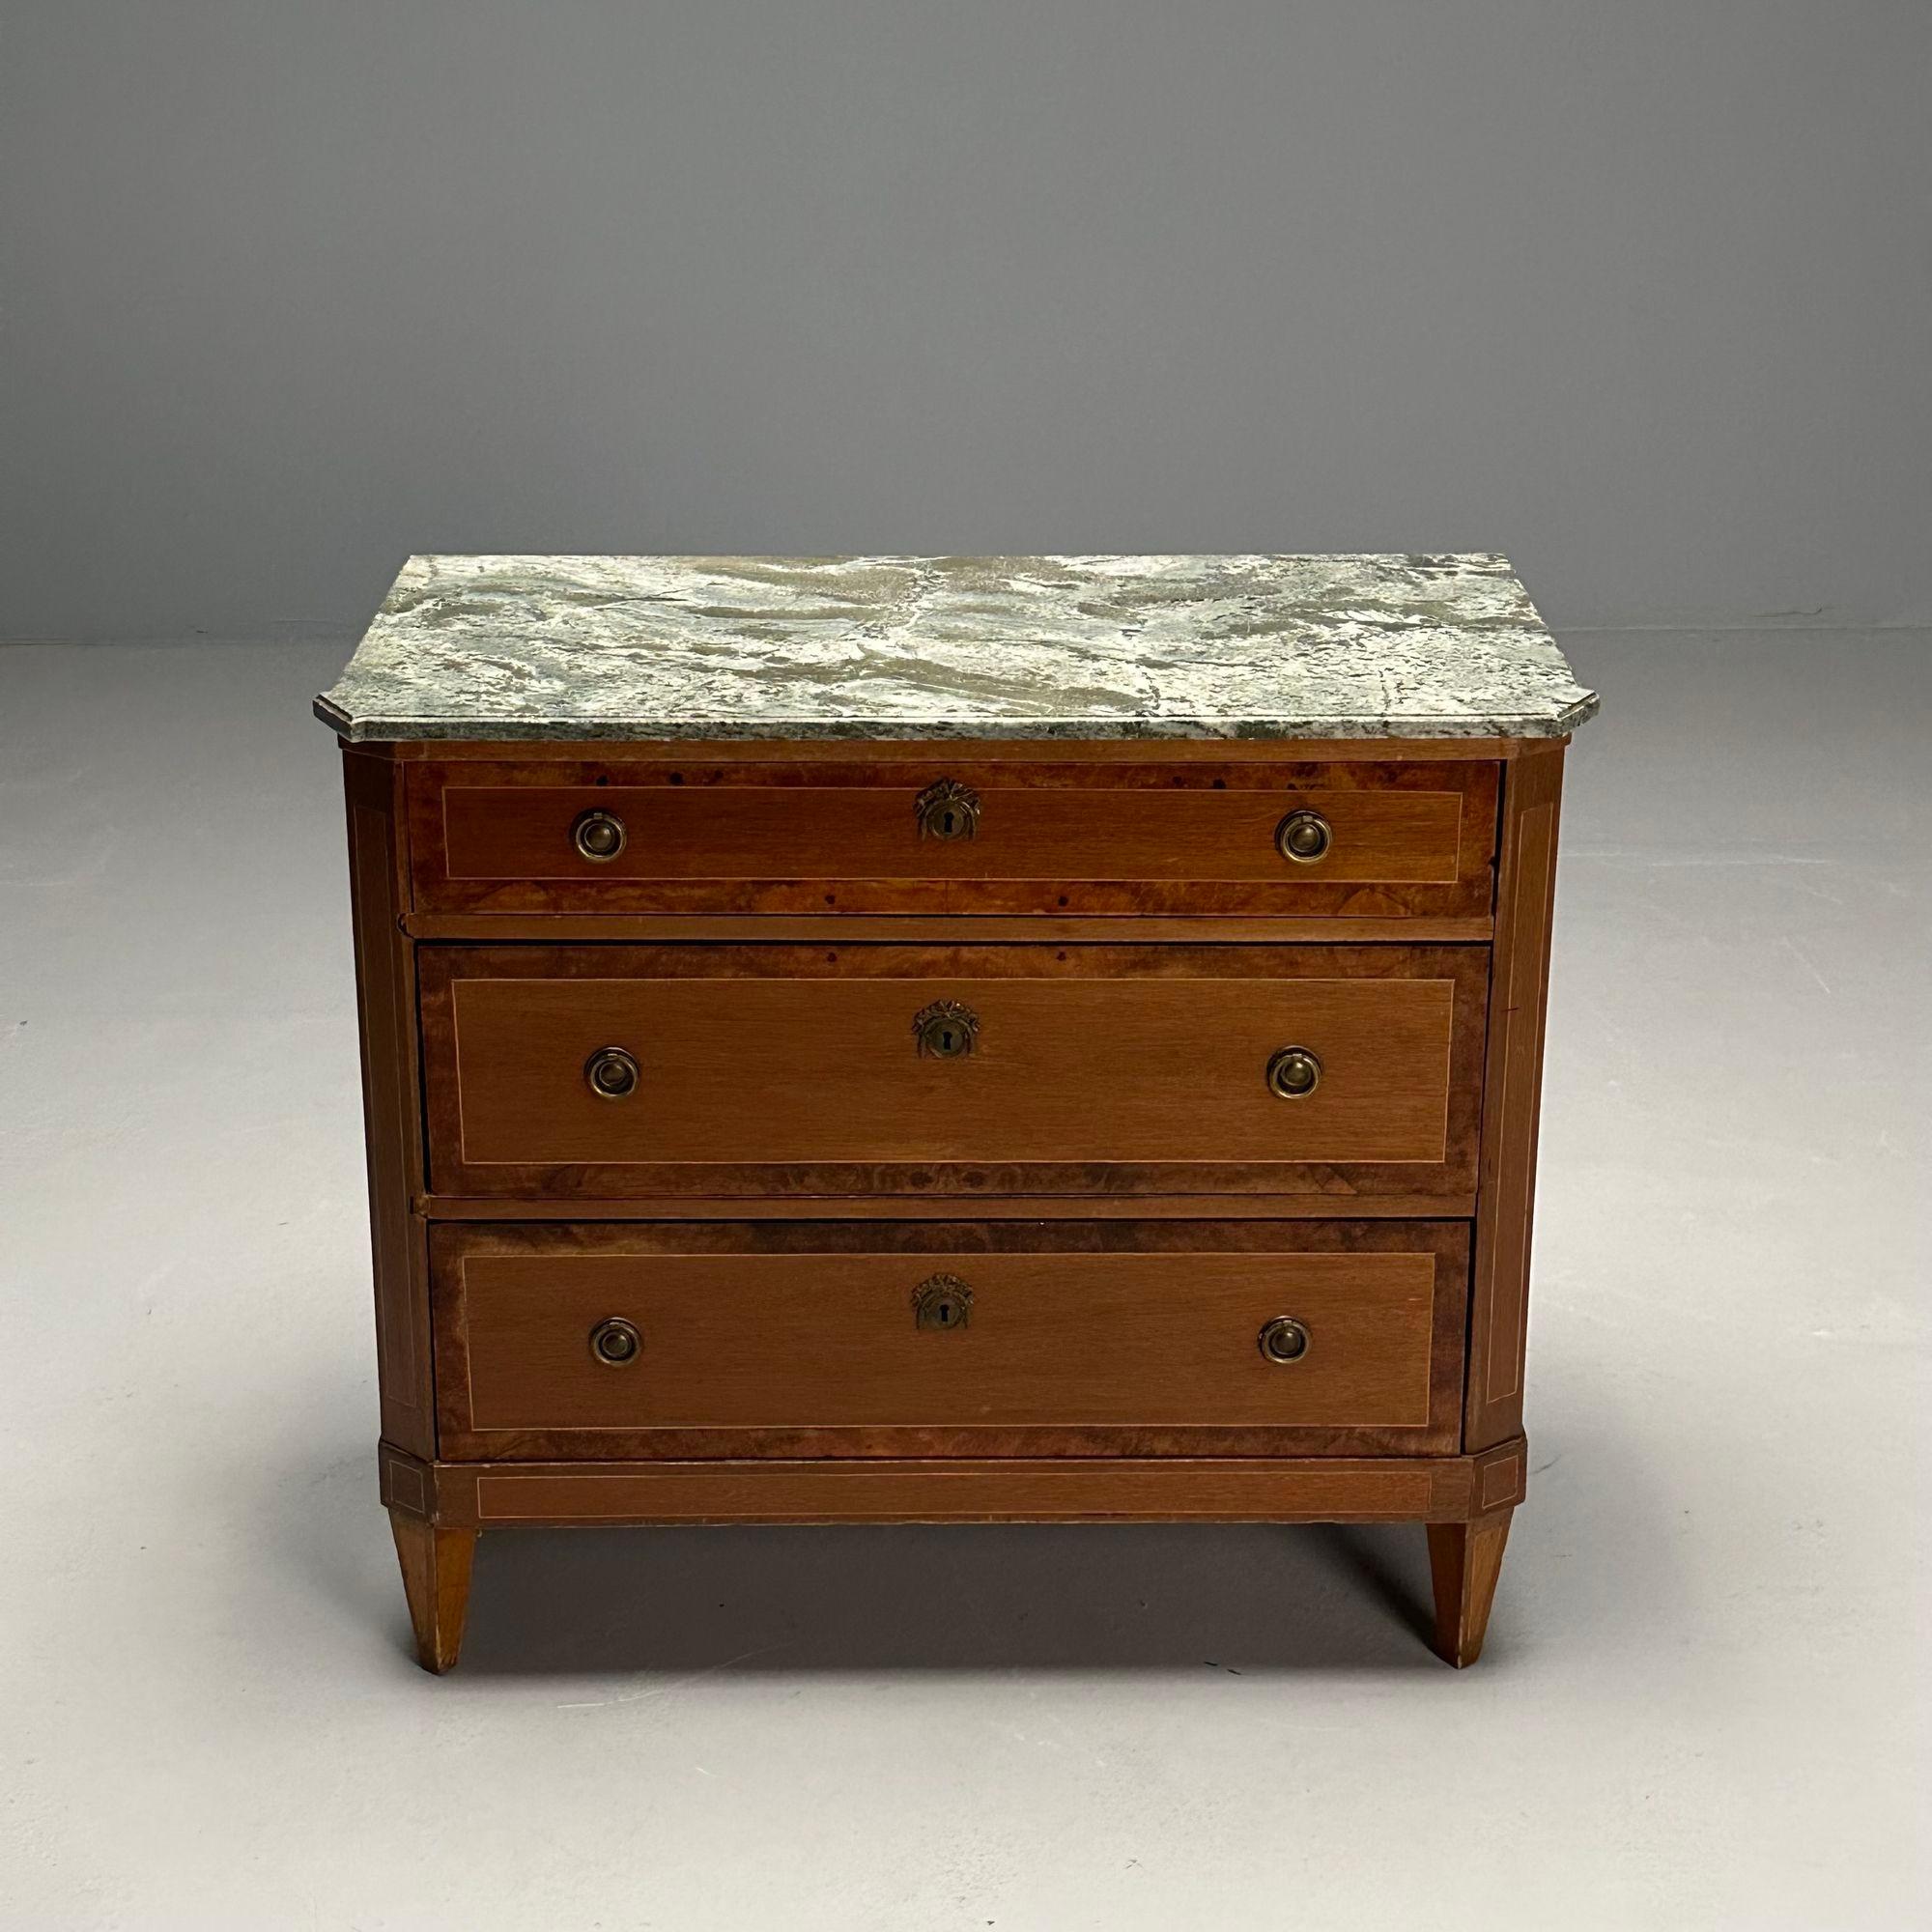 Gustavian, Louis XVI Style, Swedish Commode, Birch, Marble, Brass, 1950s

Gustavian dresser or nightstands designed and produced in Sweden circa 1950s. This example having a birch veneer, green and white veined marble top, and three dovetailed